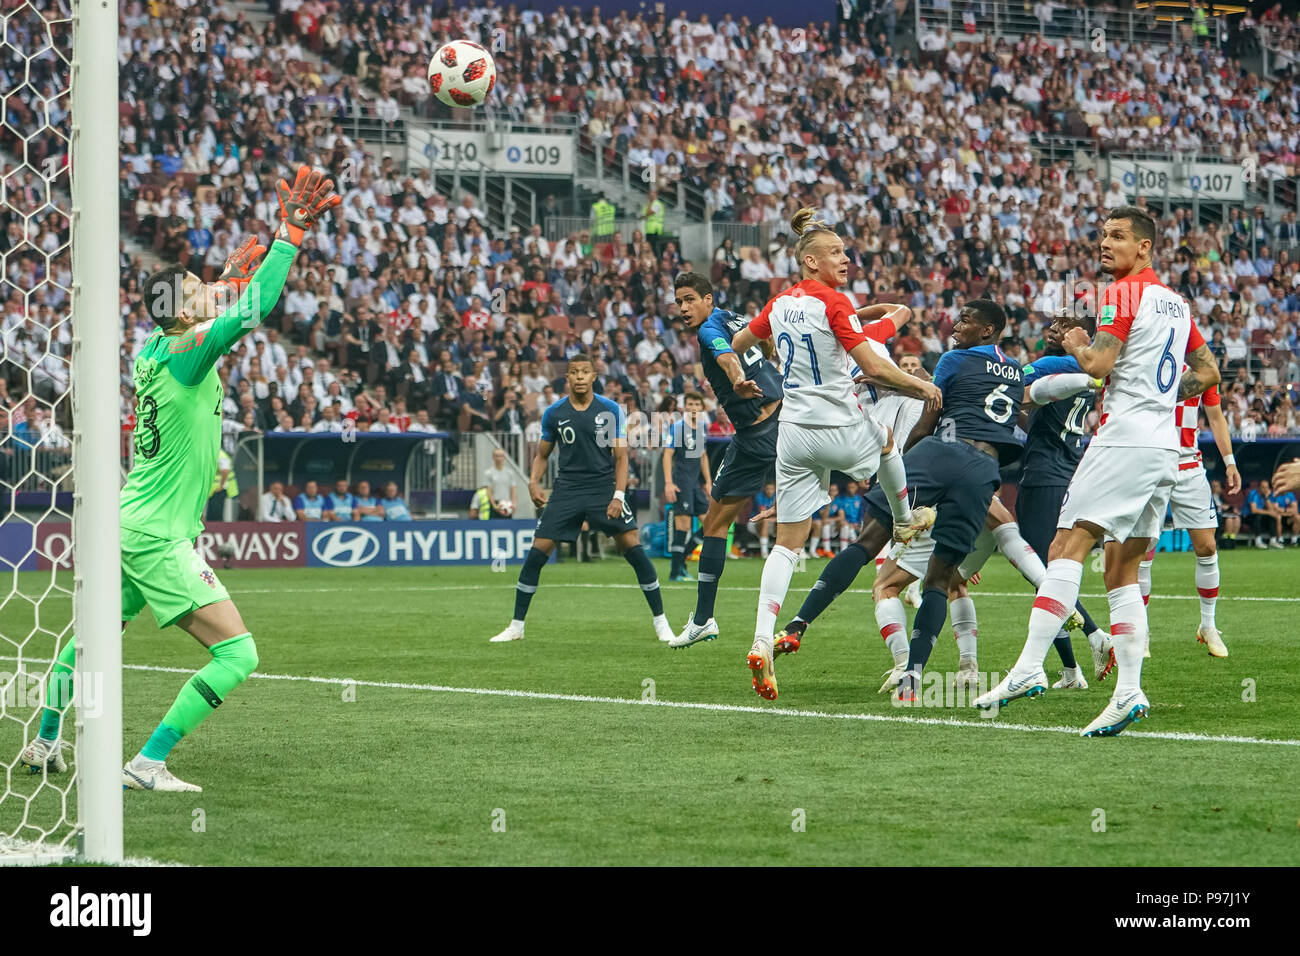 Moscow, Russia. 15th July 2018. Mario Mandzukic of Croatia scoring own goal in the 18rd minute. 1-0 to france at Luzhniki Stadium during the final between Franceand Croatia during the 2018 World Cup. Ulrik Pedersen/CSM Credit: Cal Sport Media/Alamy Live News Stock Photo